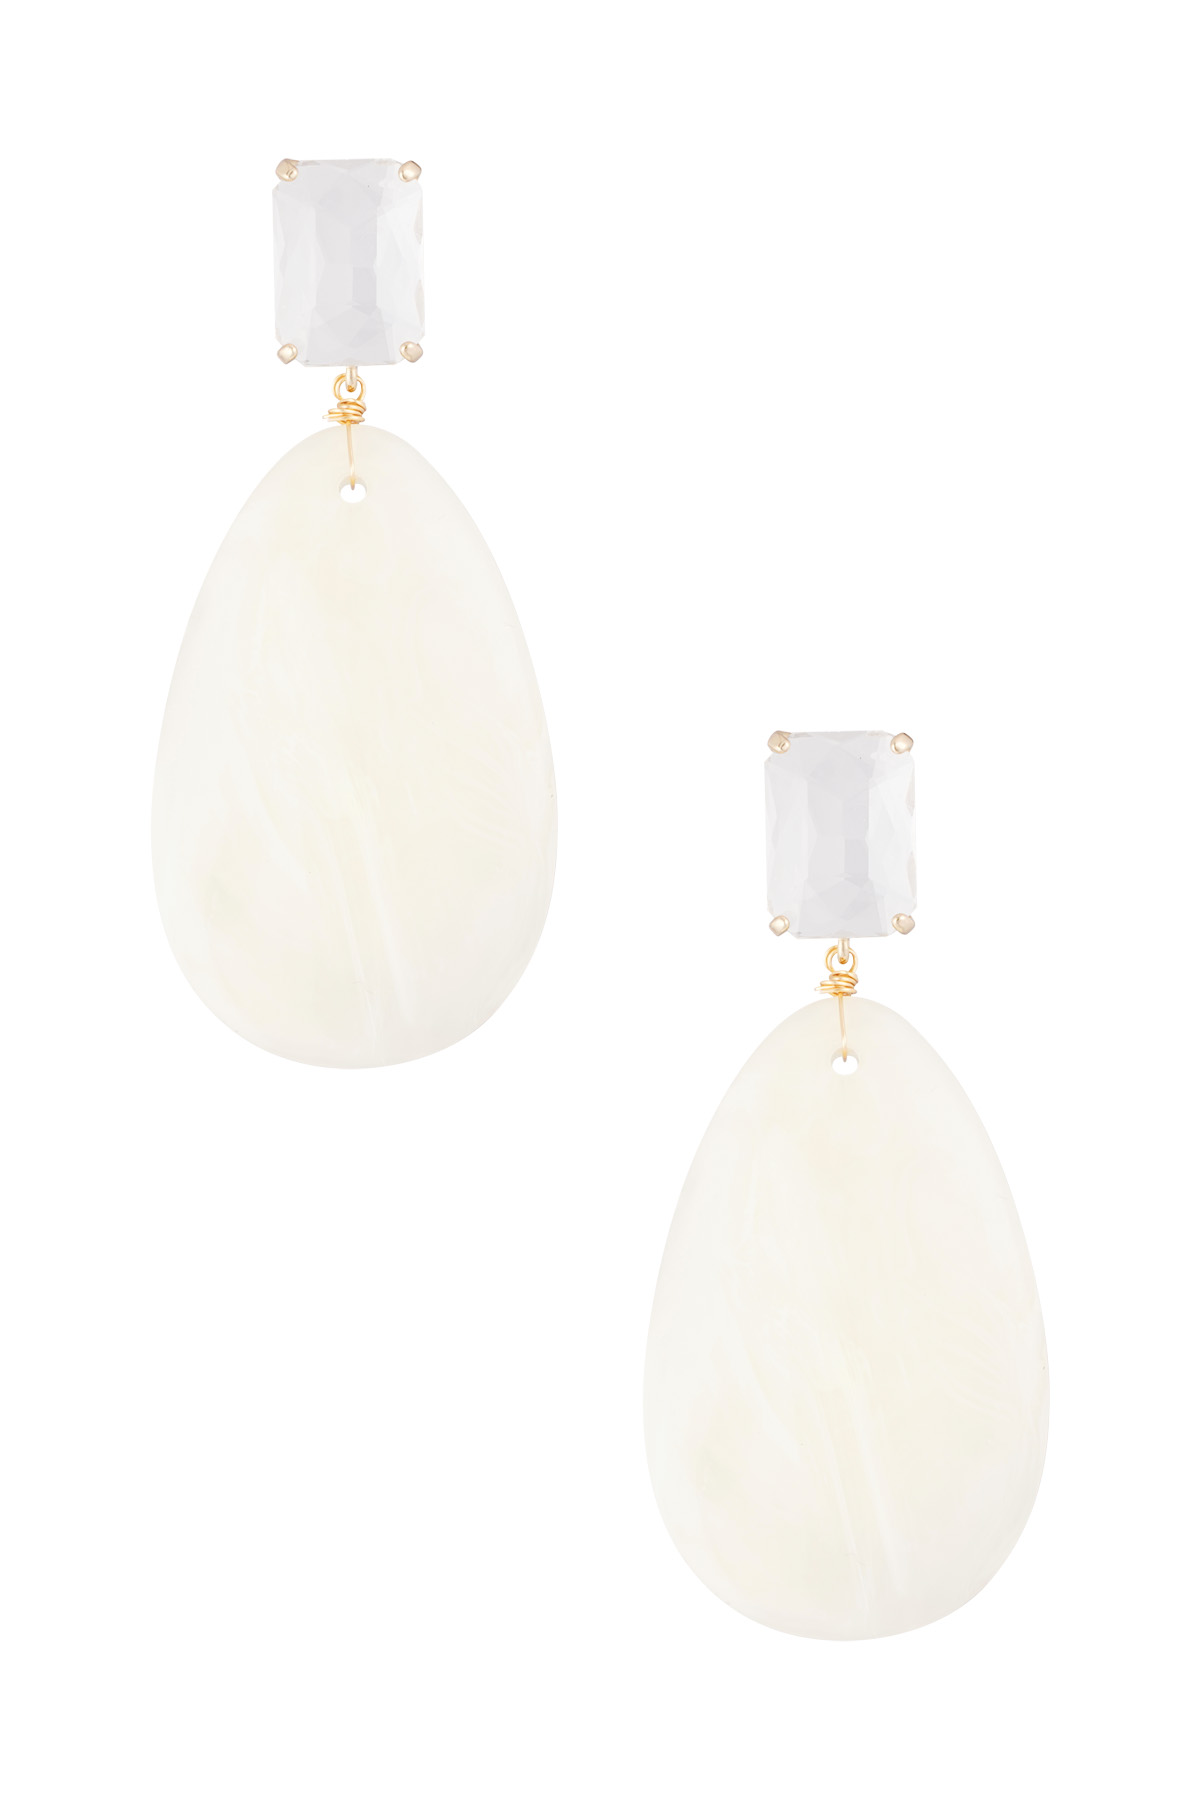 glass earrings with oval stone - white 